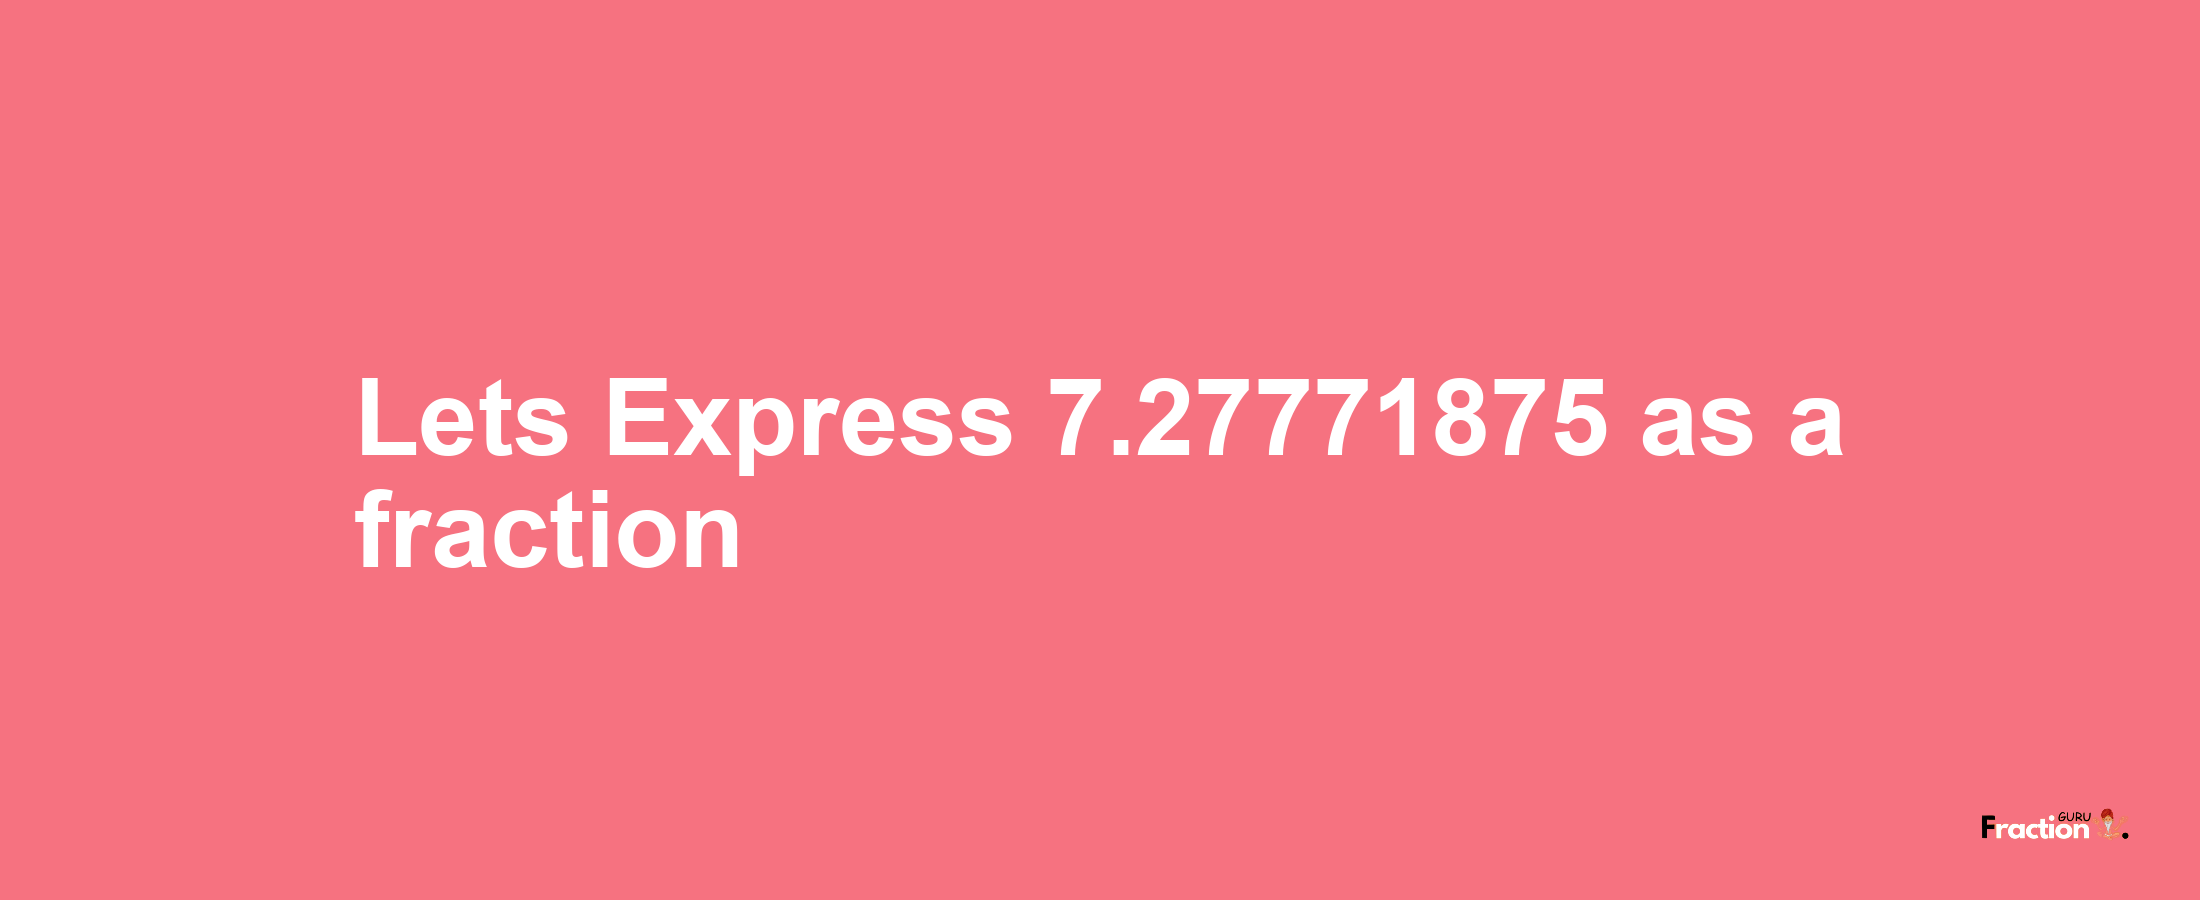 Lets Express 7.27771875 as afraction